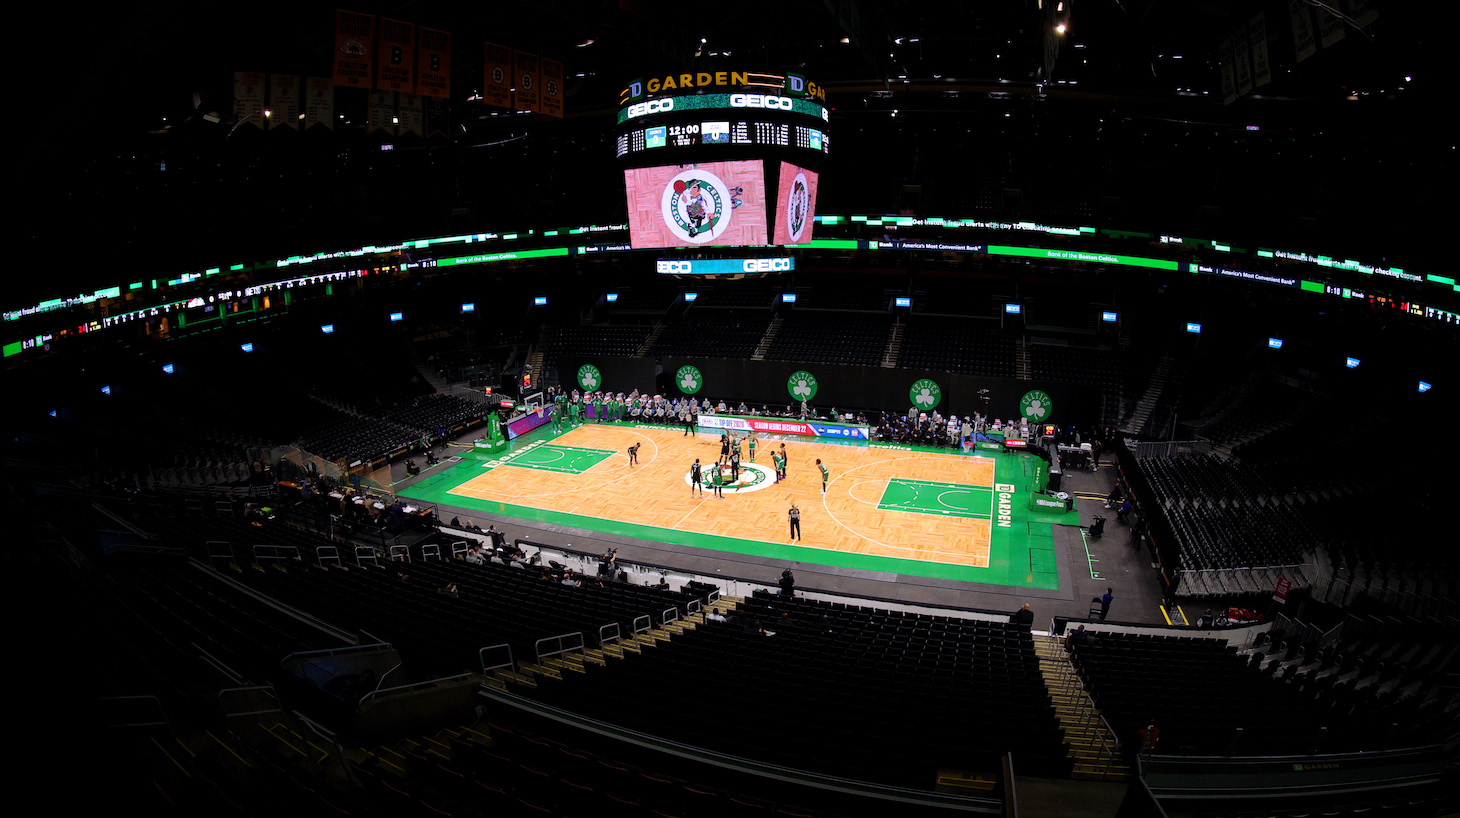 BOSTON, MASSACHUSETTS - DECEMBER 18: A general view inside TD Garden during the preseason game between the Boston Celtics and the Brooklyn Nets on December 18, 2020 in Boston, Massachusetts. NOTE TO USER: User expressly acknowledges and agrees that, by downloading and or using this photograph, User is consenting to the terms and conditions of the Getty Images License Agreement. (Photo by Maddie Meyer/Getty Images)